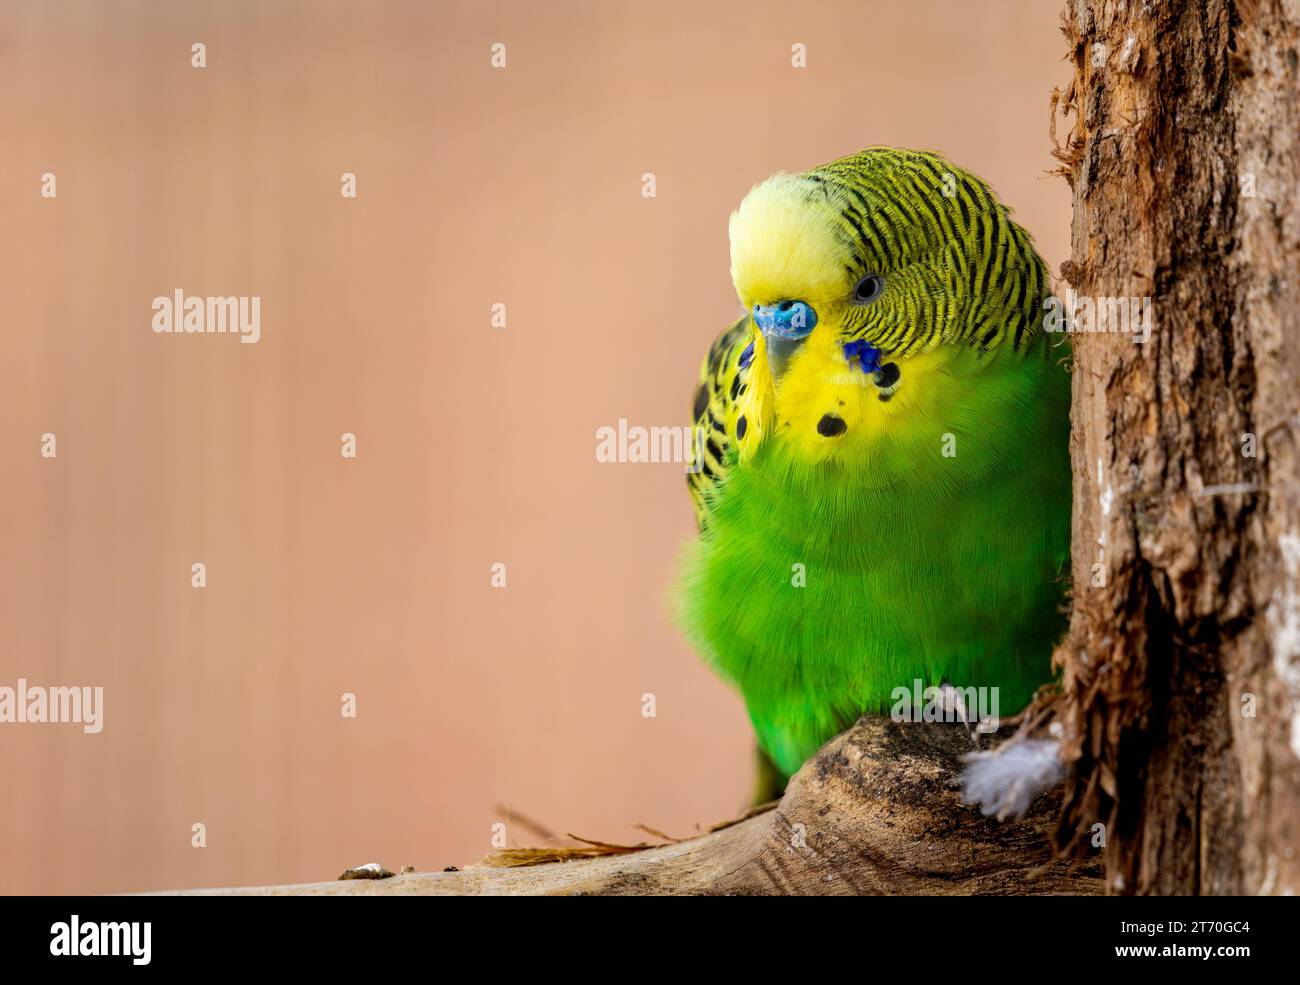 close-up of a budgerigar (Melopsittacus undulatus) clinging to a tree isolated Stock Photo